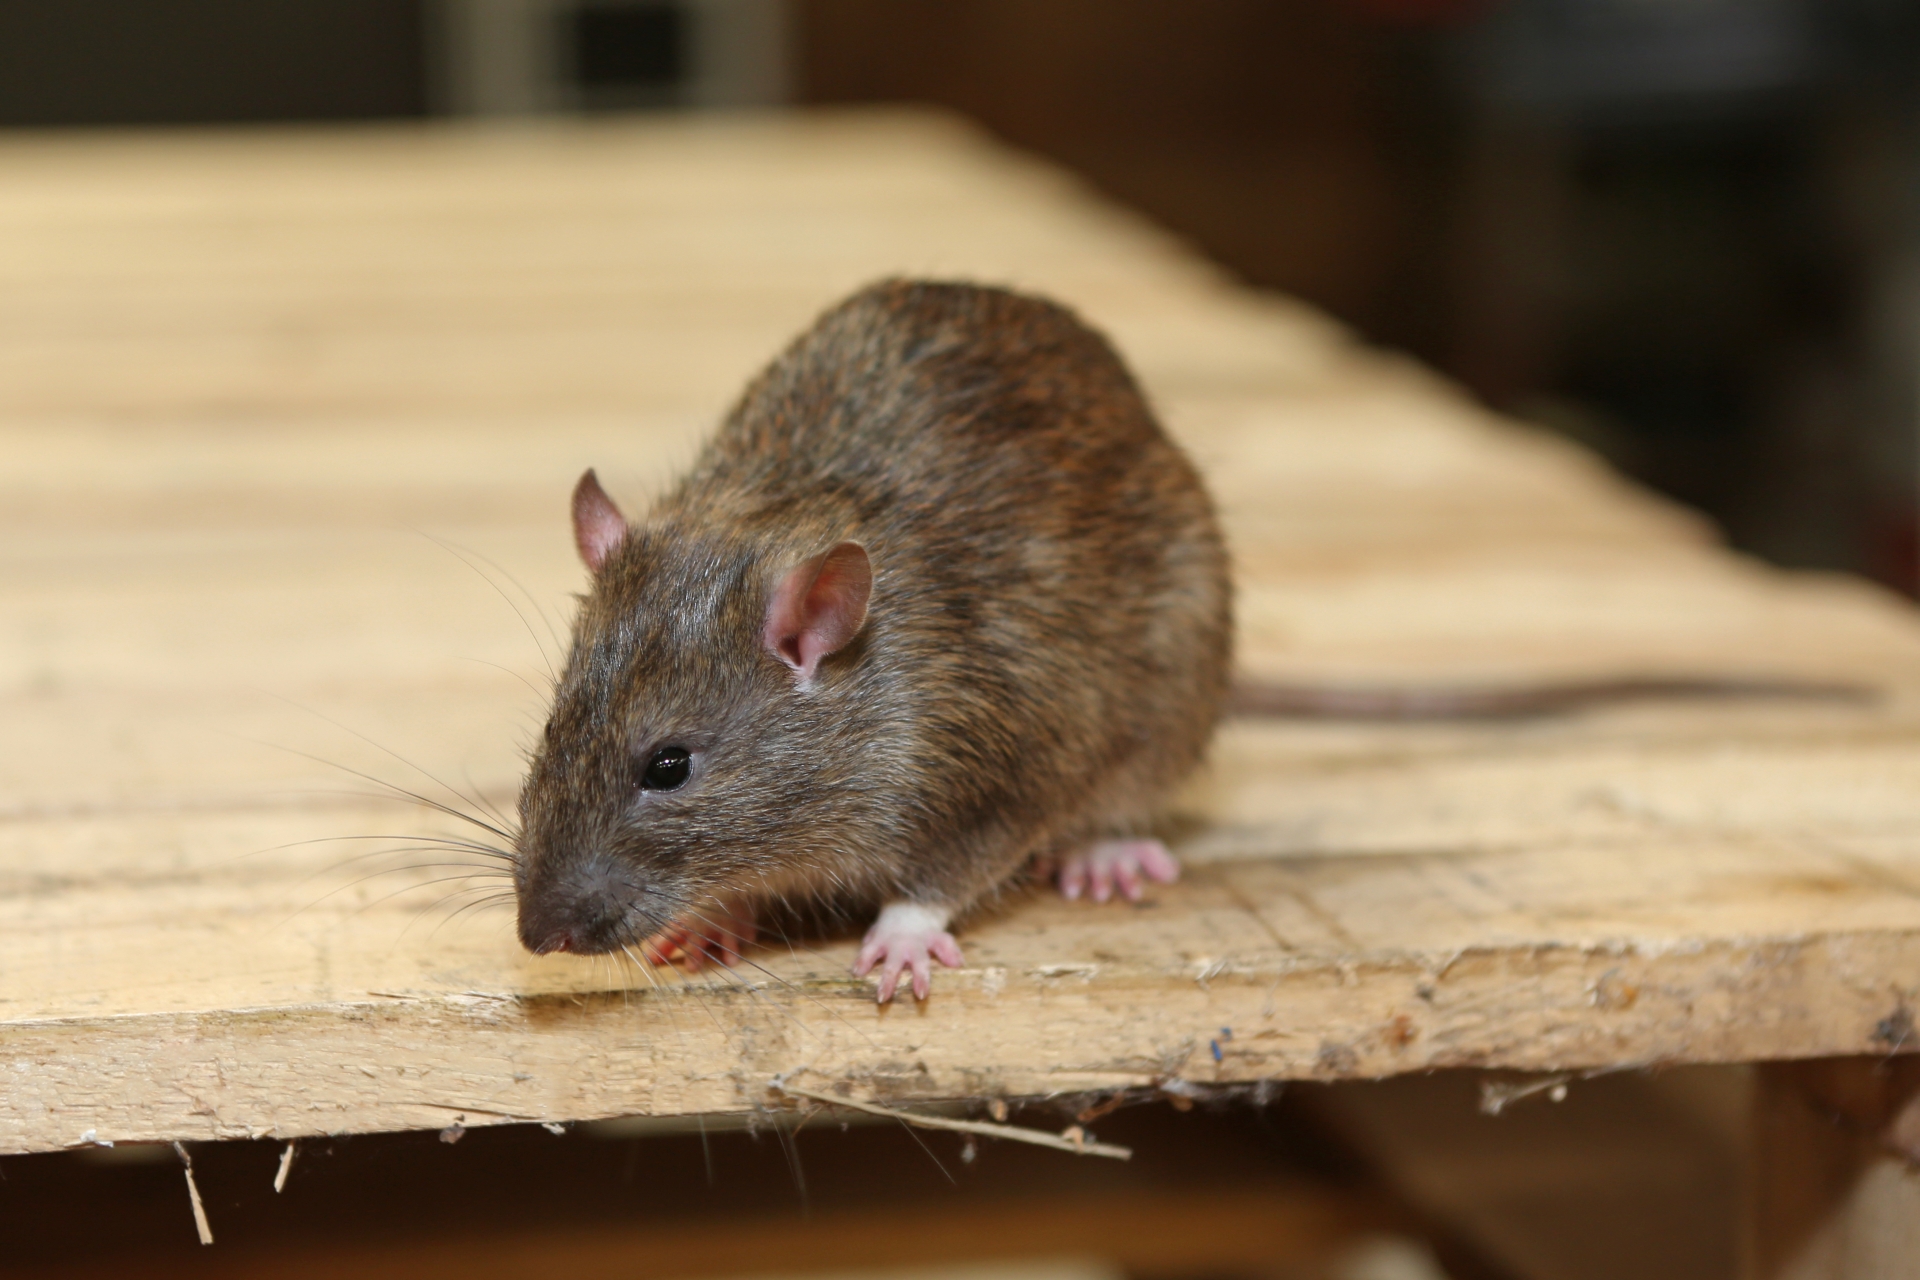 Rat Control, Pest Control in Parson's Green, SW6. Call Now 020 8166 9746